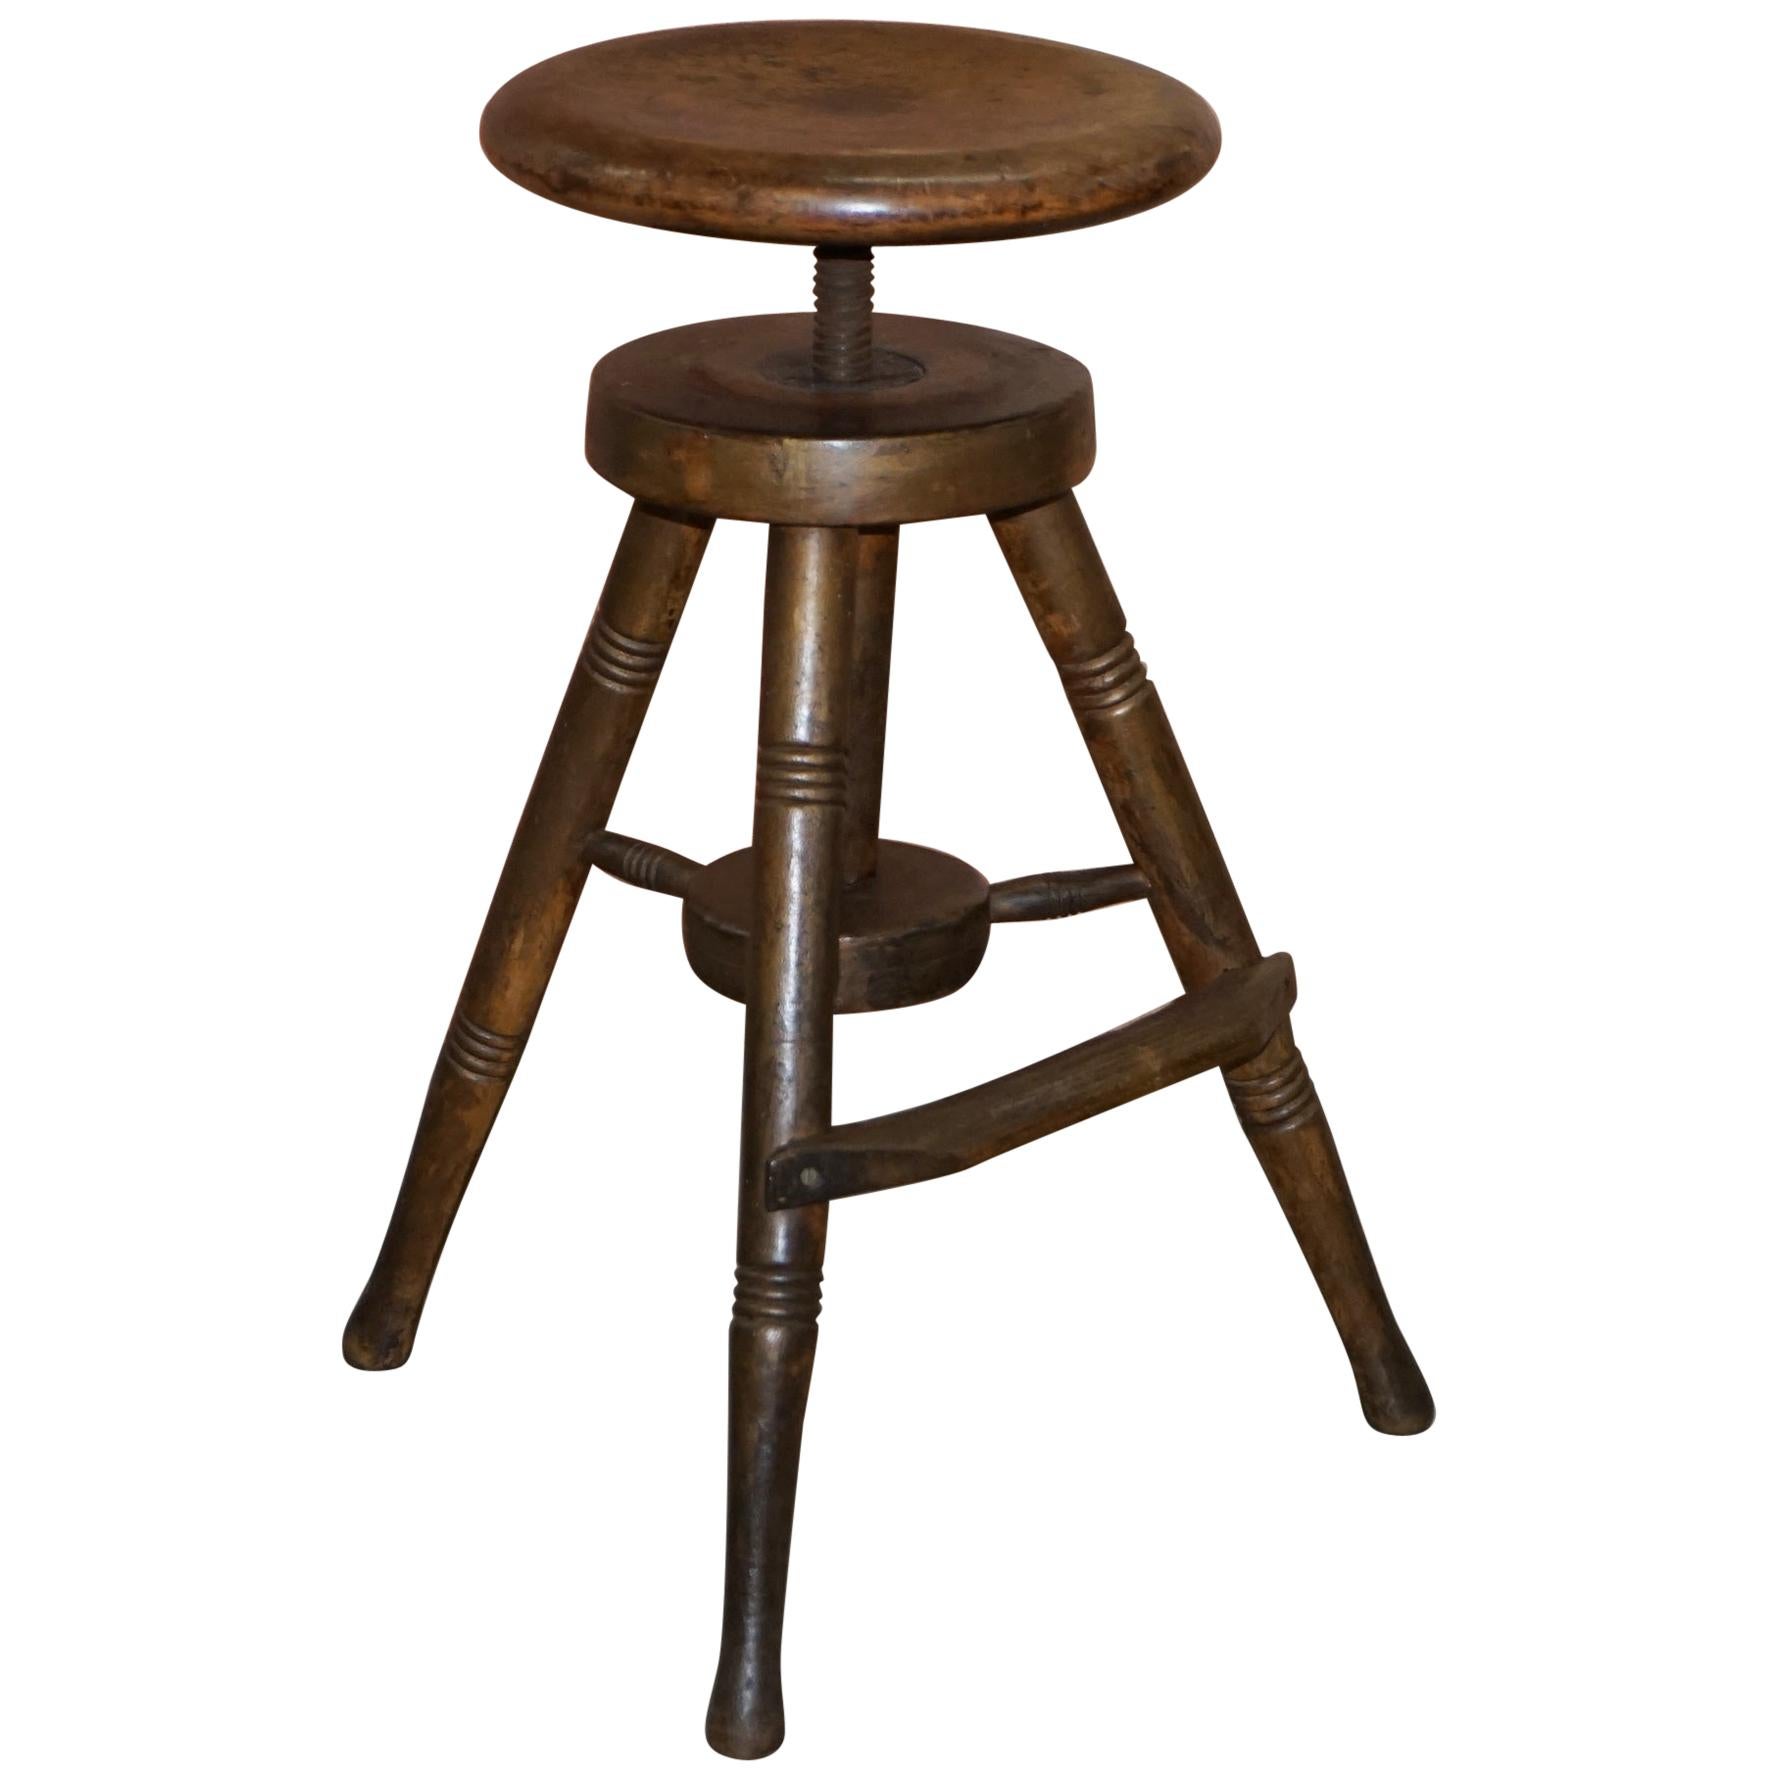 Early 19th Century Walnut Antique Architects Artists Stool Height Adjustable